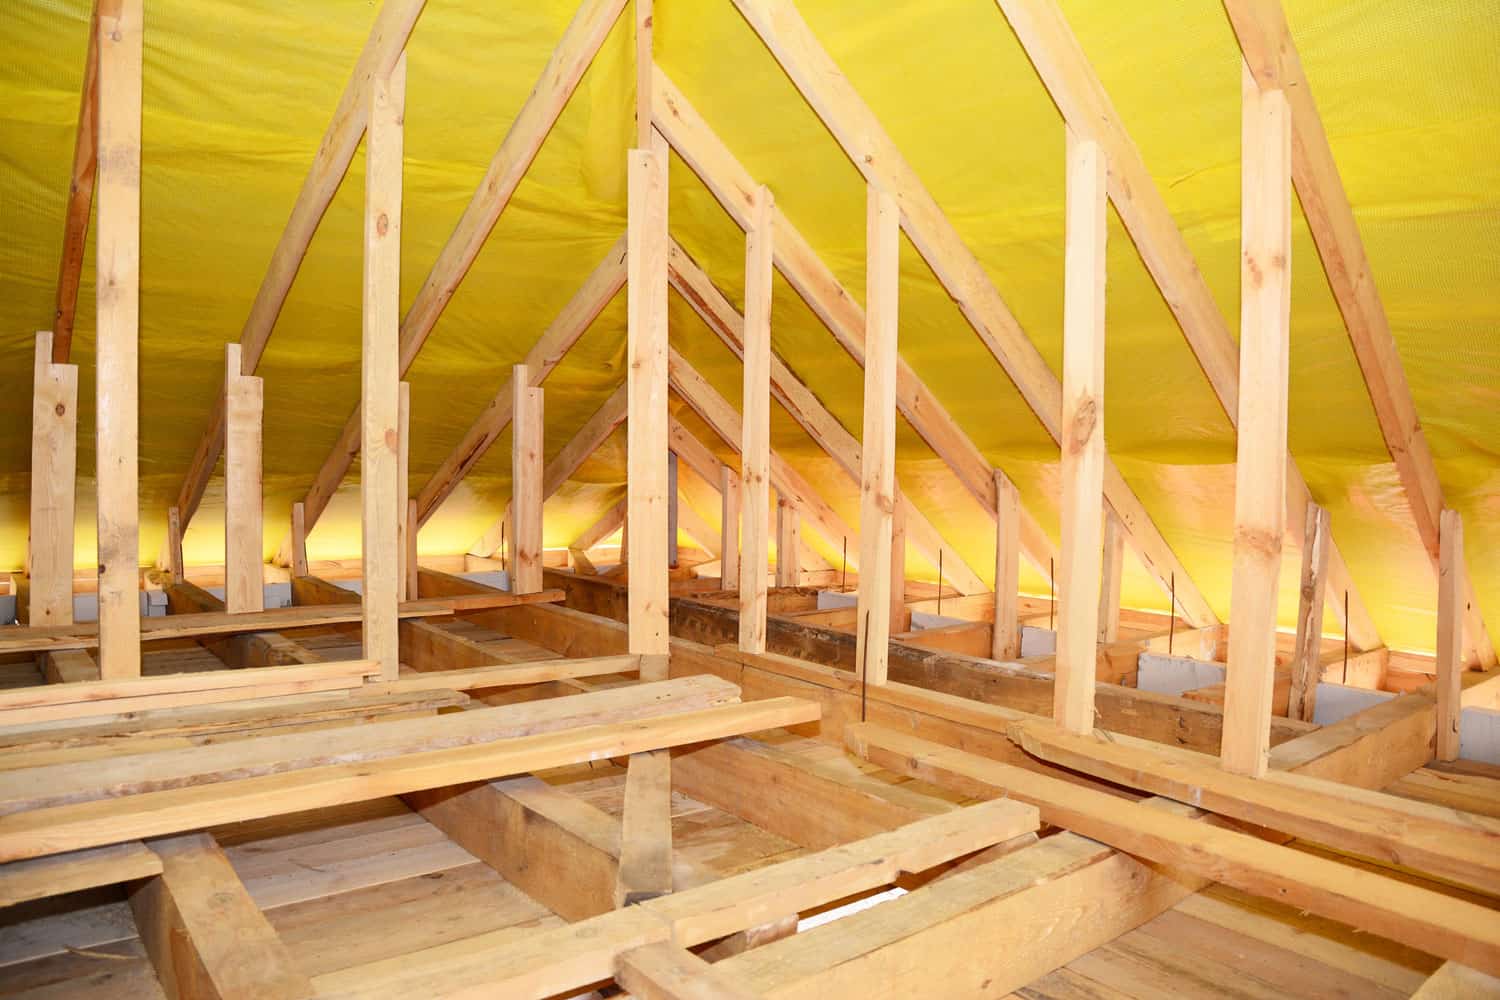 How To Install A Support Beam In The Attic